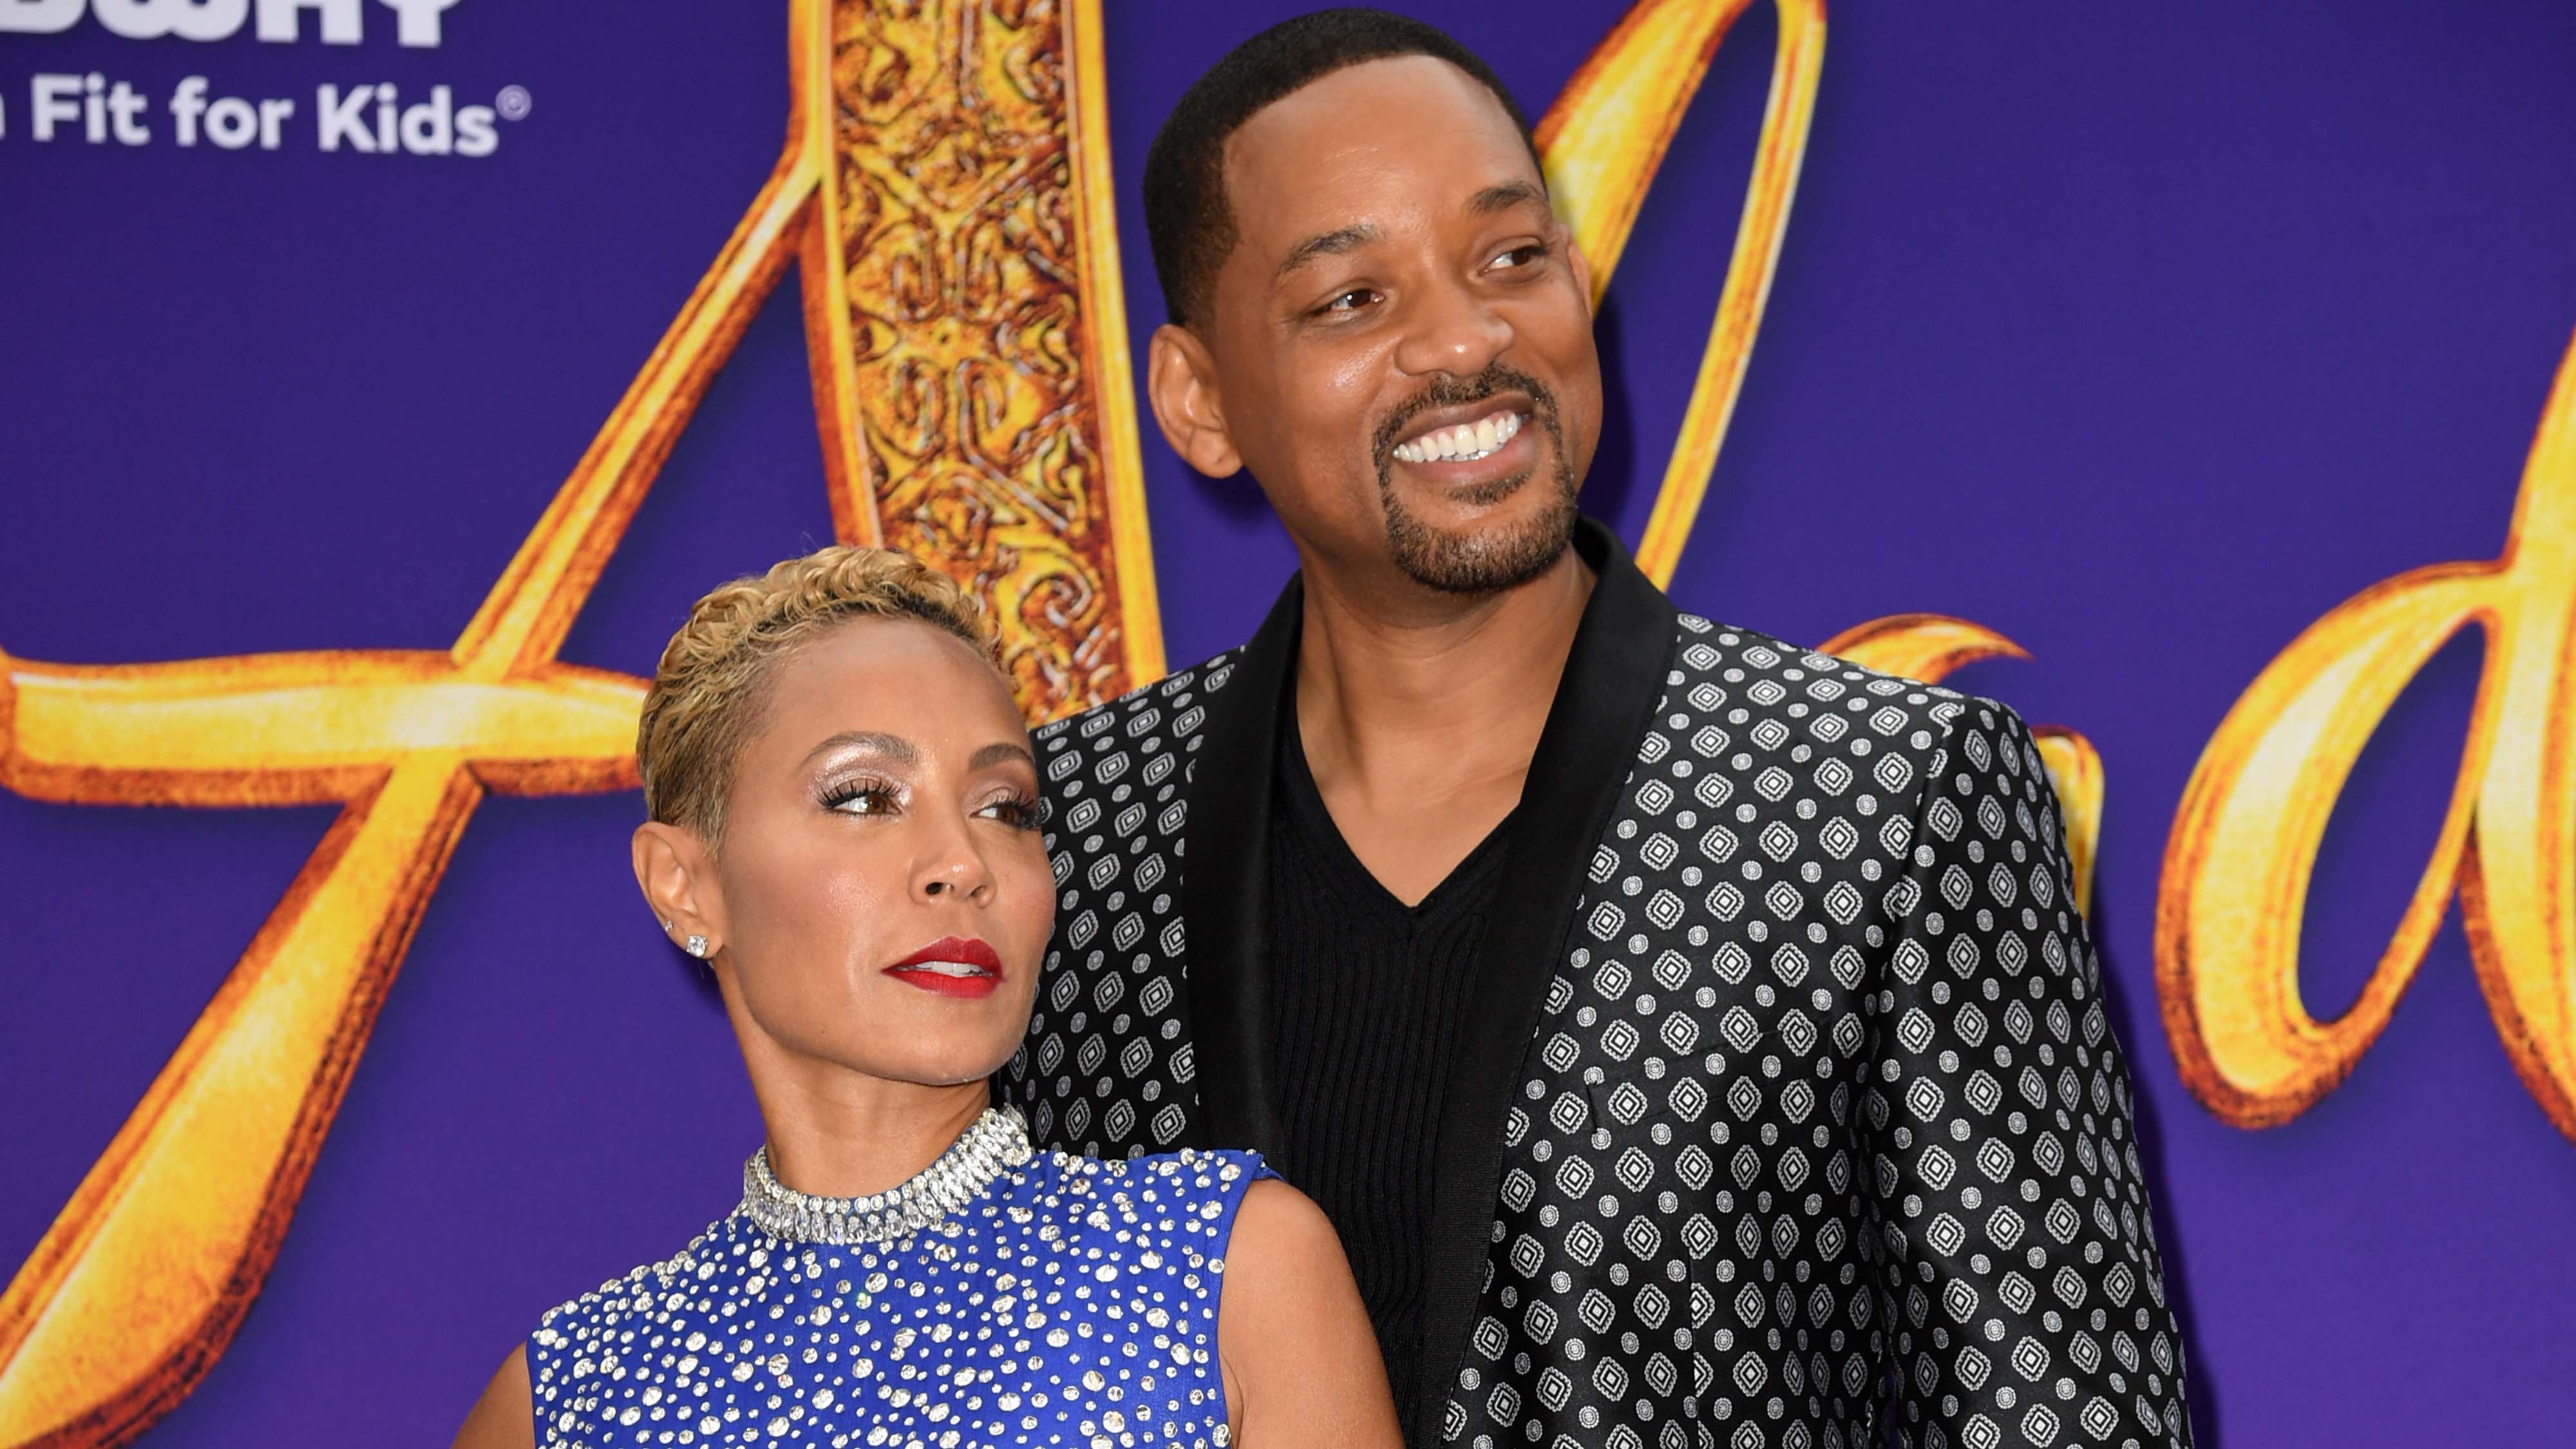 Will Smith And Jada Pinkett Smith's Relationship History and Timeline